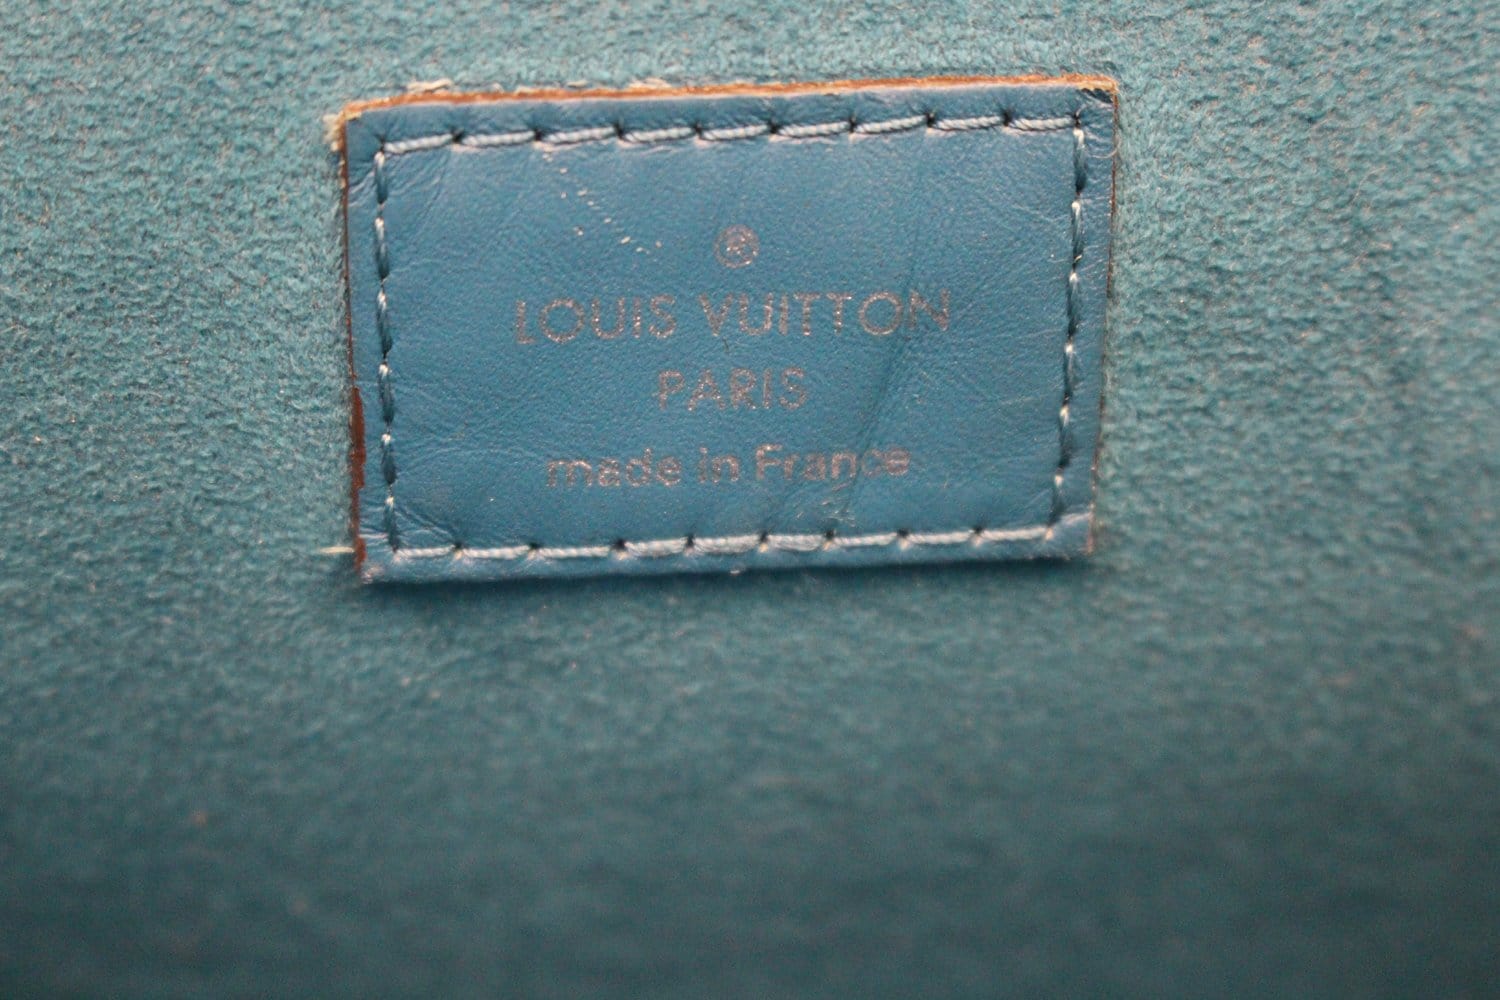 Authentic Pre Owned Louis Vuitton Neverfull MM w/ Cyan Epi Leather